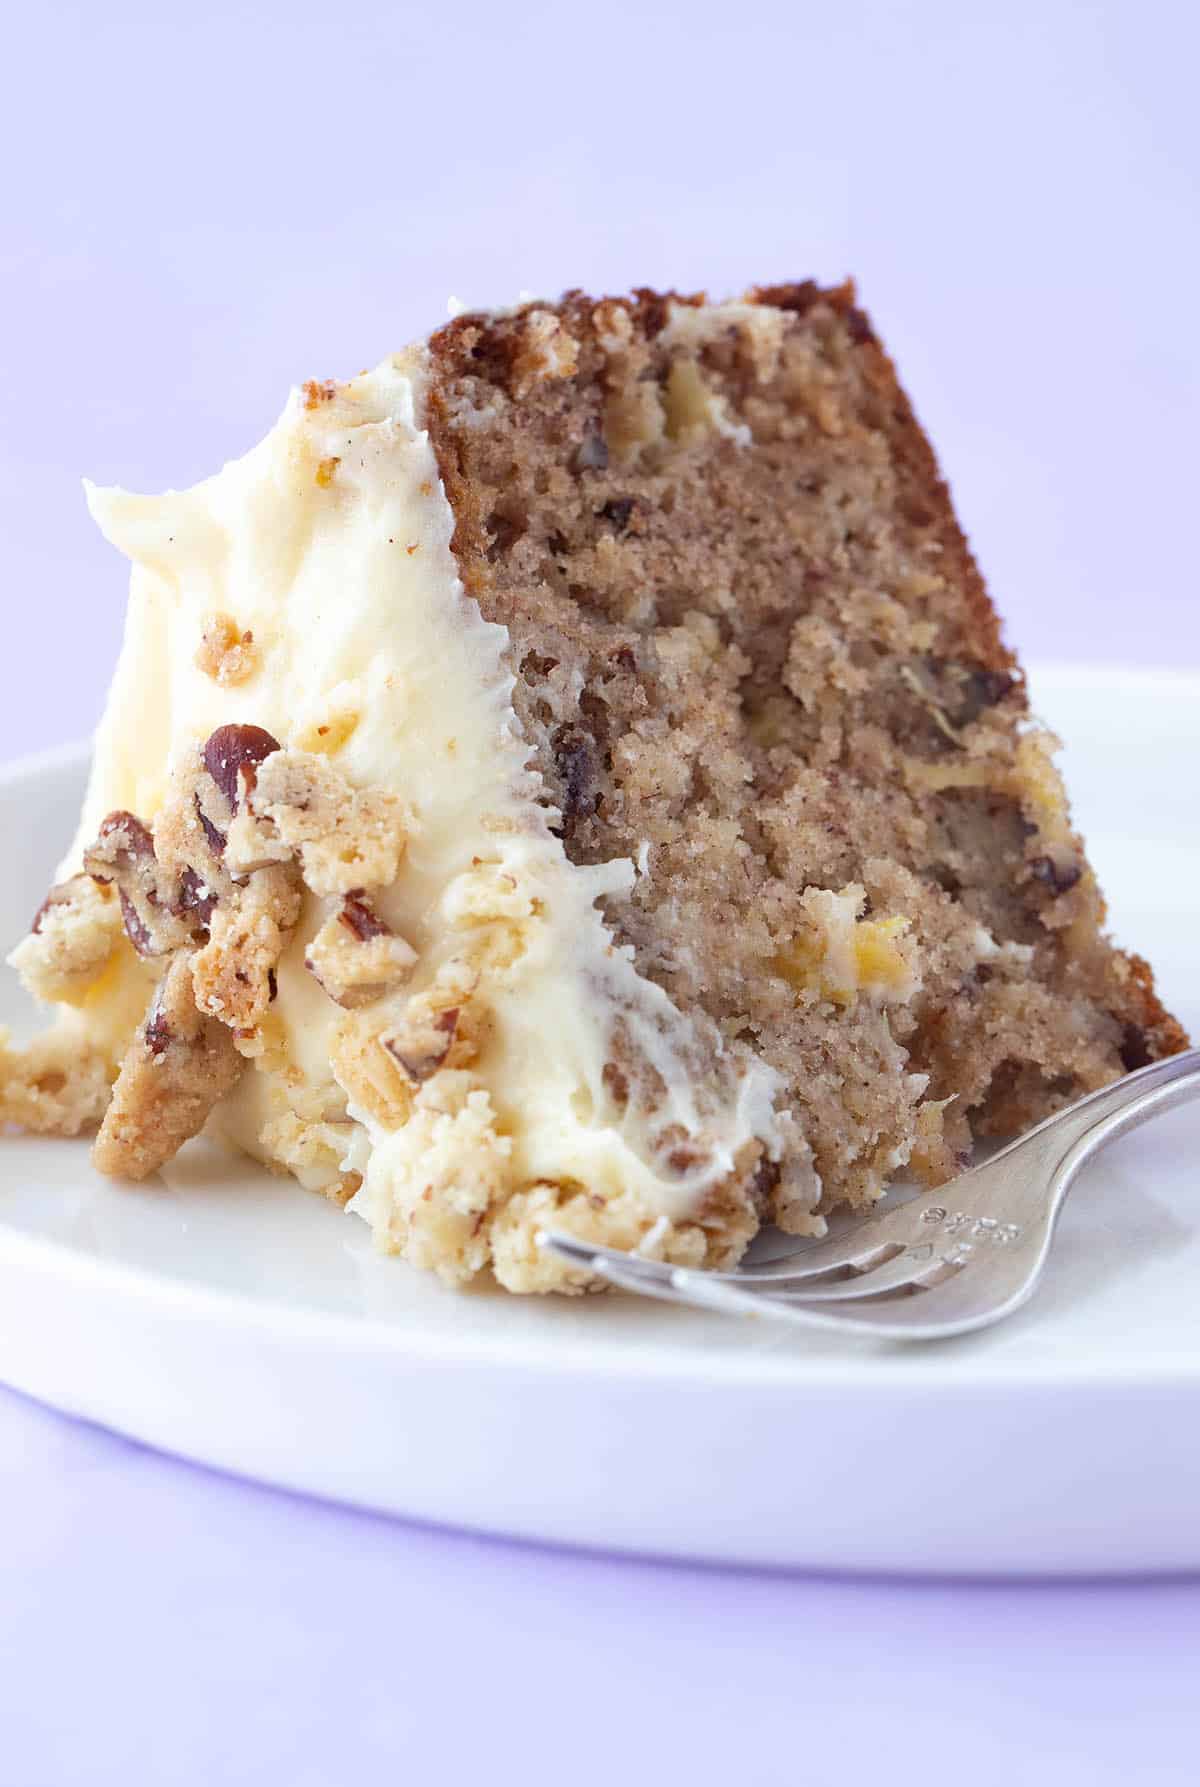 A piece of Hummingbird Cake sitting on a white plate.